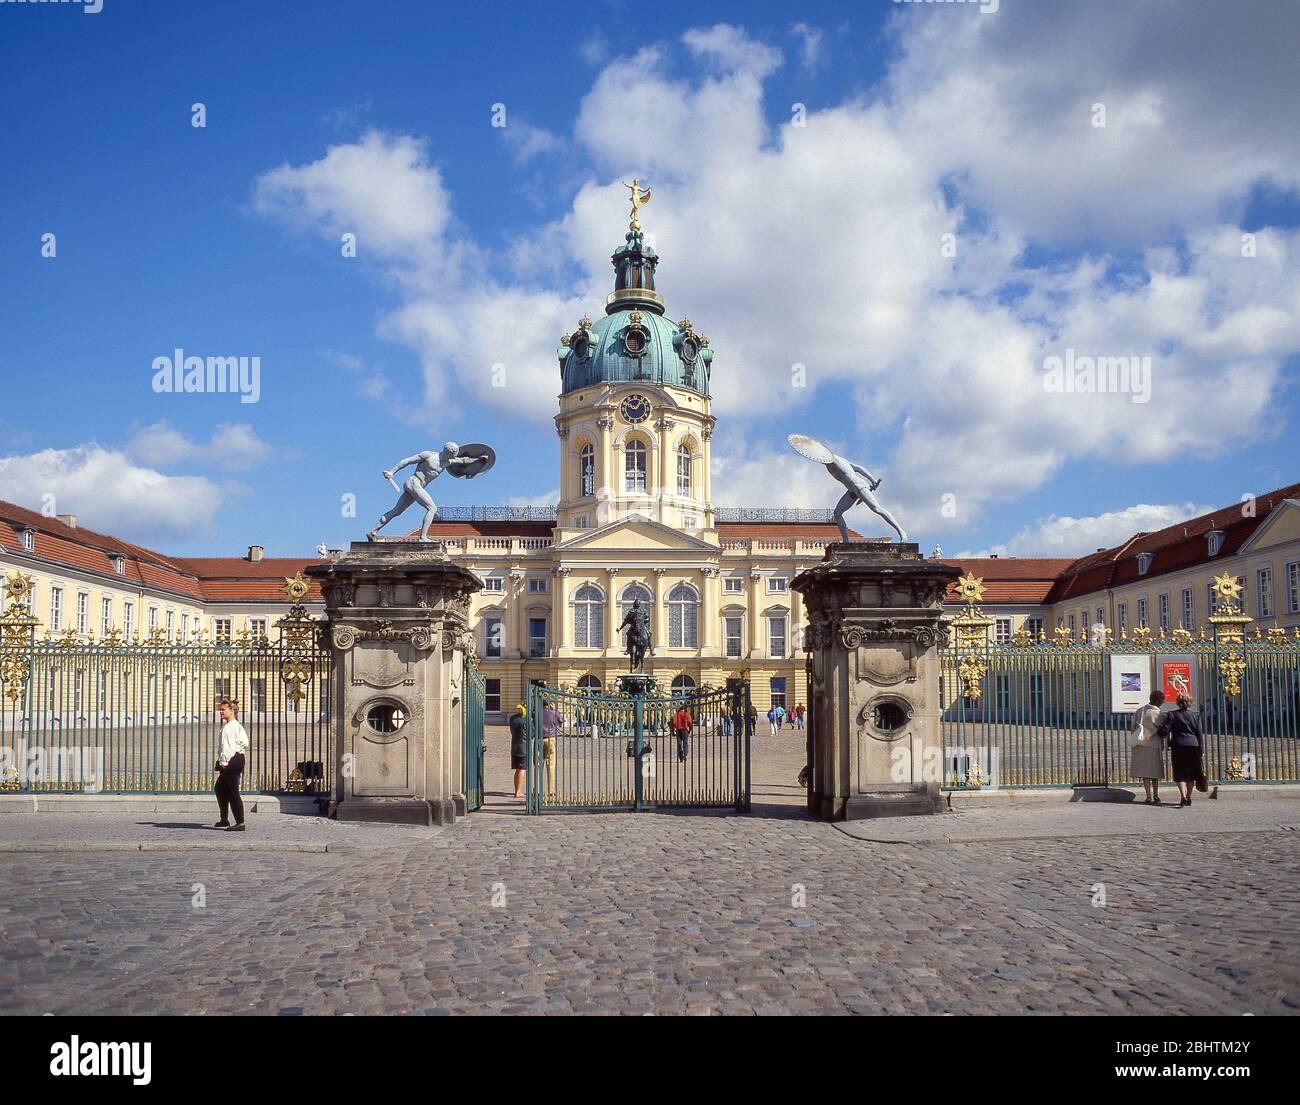 Front facade and gate of 17th century Charlottenburg Palace (Schloss Charlottenburg), Charlottenburg, Berlin, Federal Republic of Germany Stock Photo